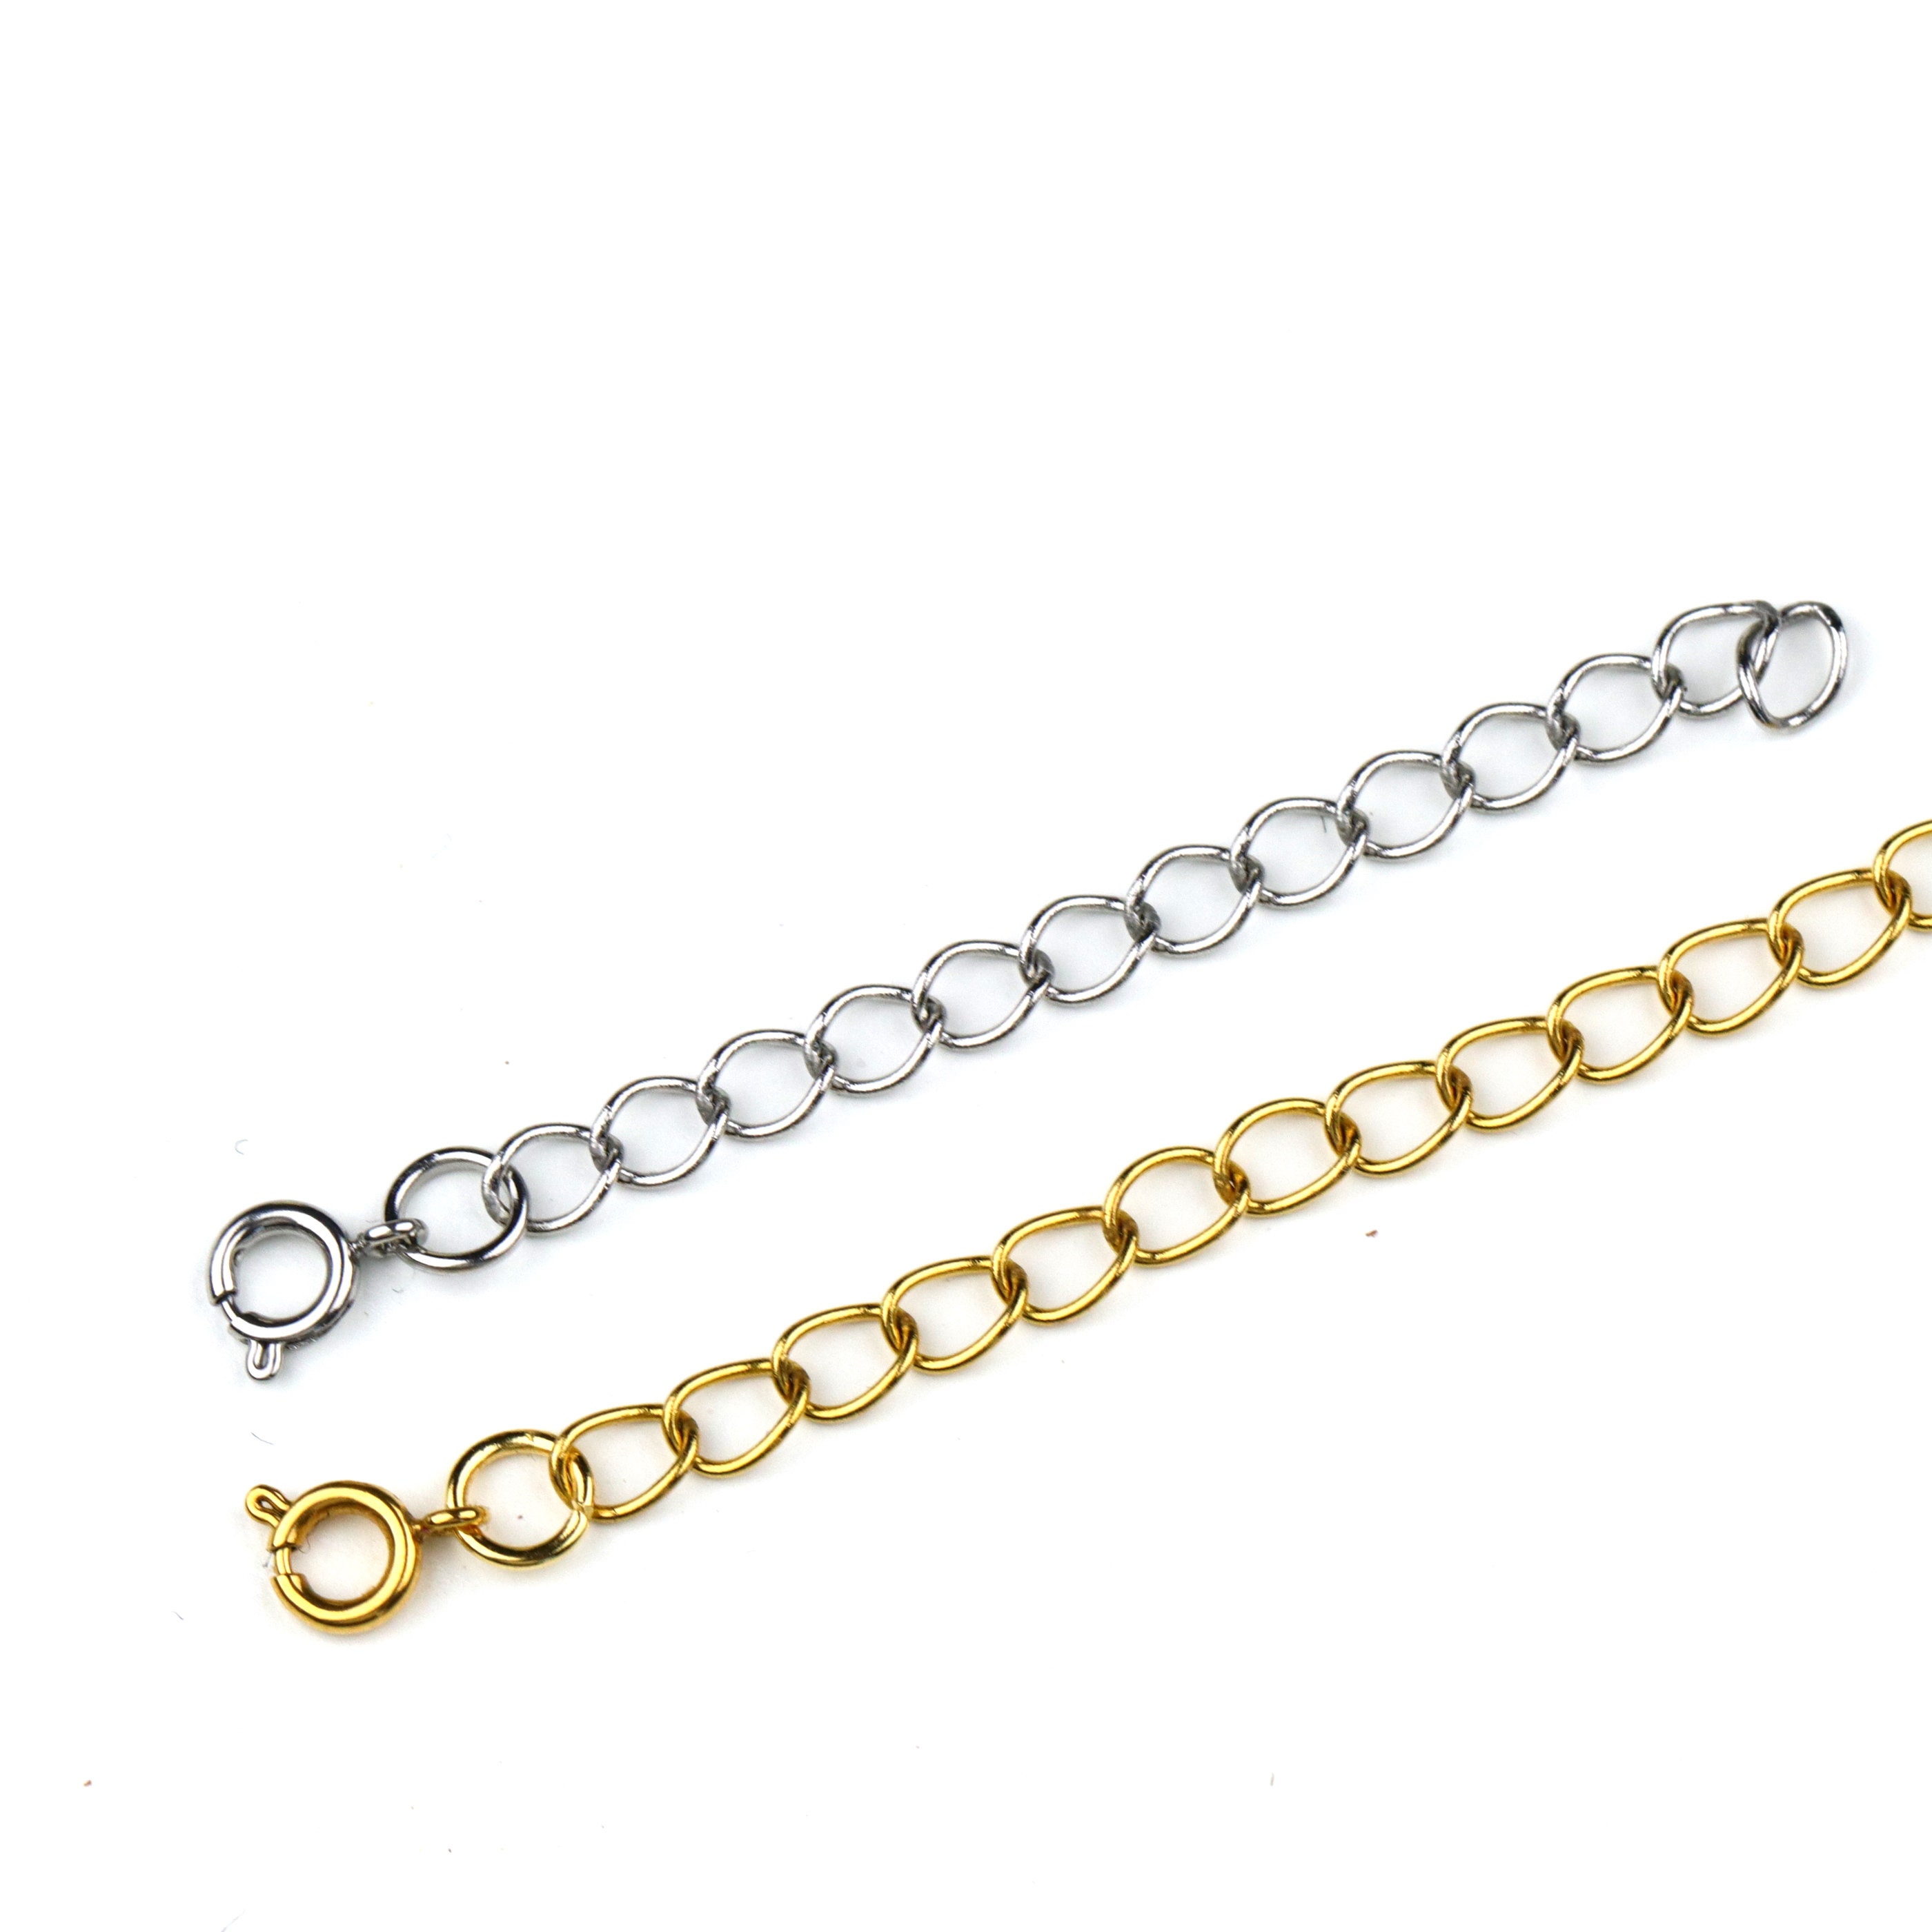 Chain Extender (2 inches) – Mad Made Metals